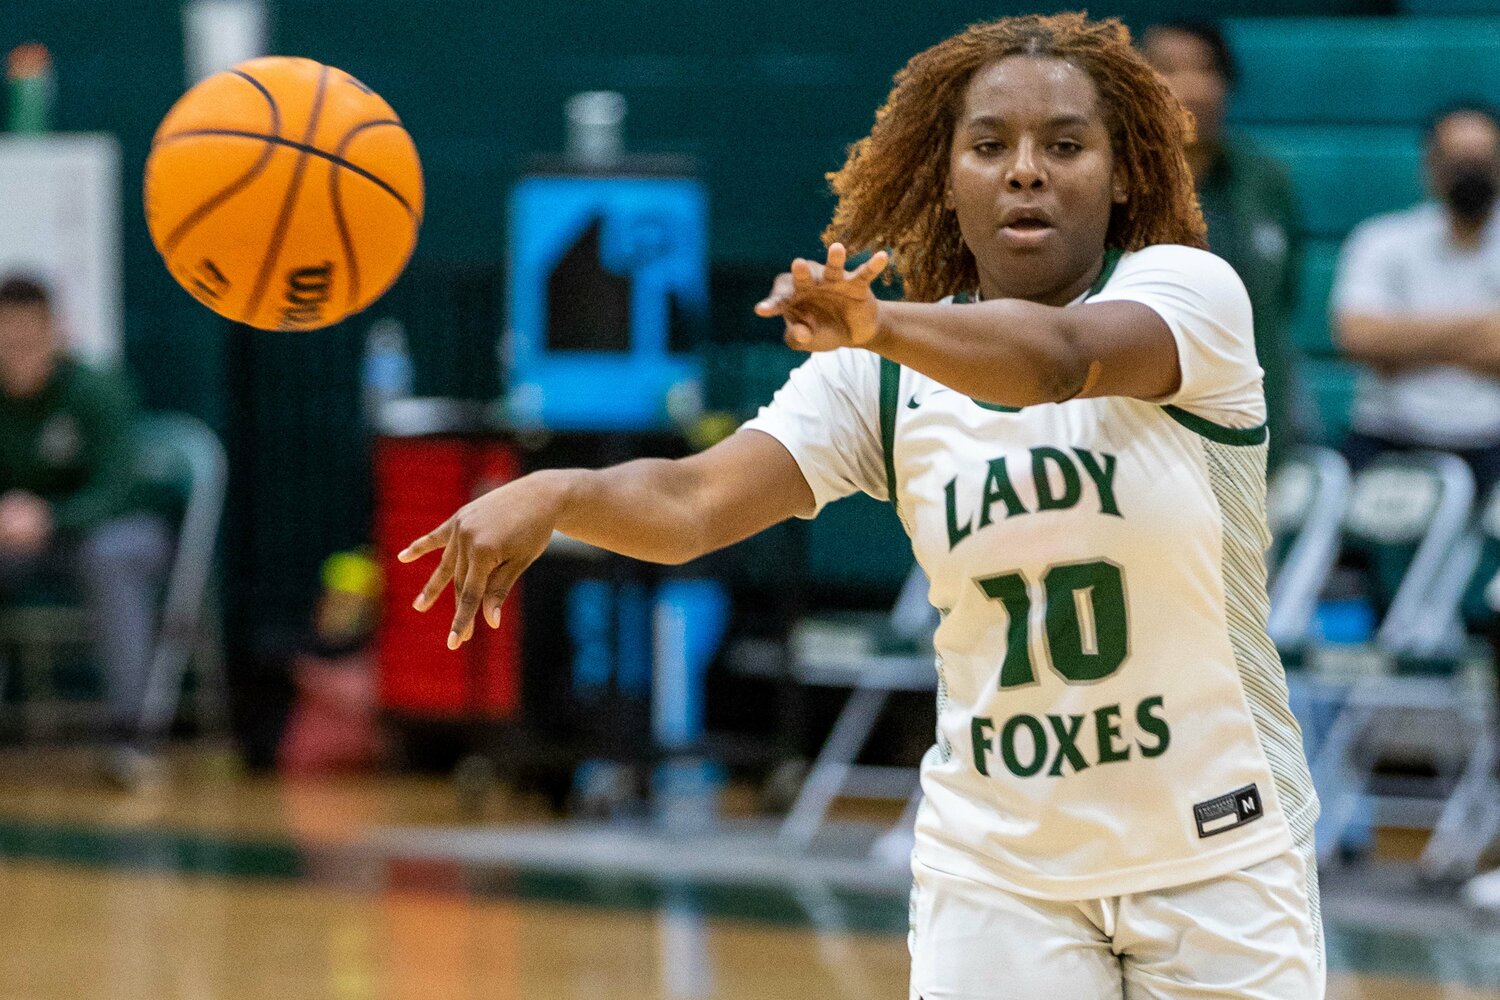 The Dutch Fork girls basketball team is off to a strong start this season and will be put to the test against A.C. Flora this week